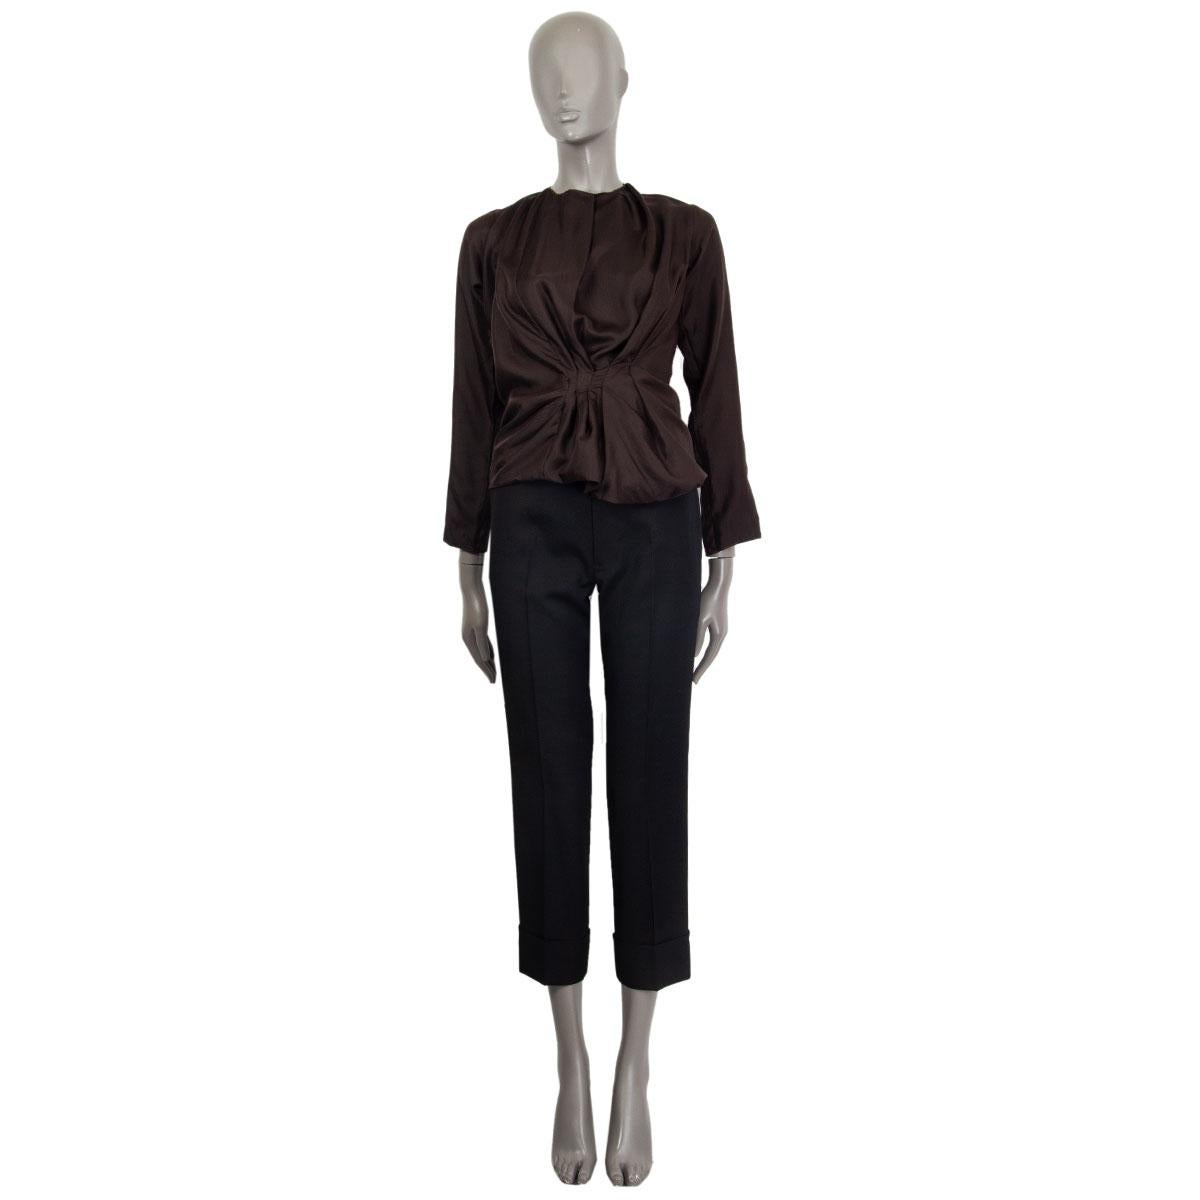 100% authentic Nina Ricci long sleeve gathered blouse in espresso brown silk (100%) with elastic gathered band on the bottom. Opens with a button in the neck. Has been worn and is in excellent condition. 

Measurements
Tag Size	34
Size	XXS
Shoulder